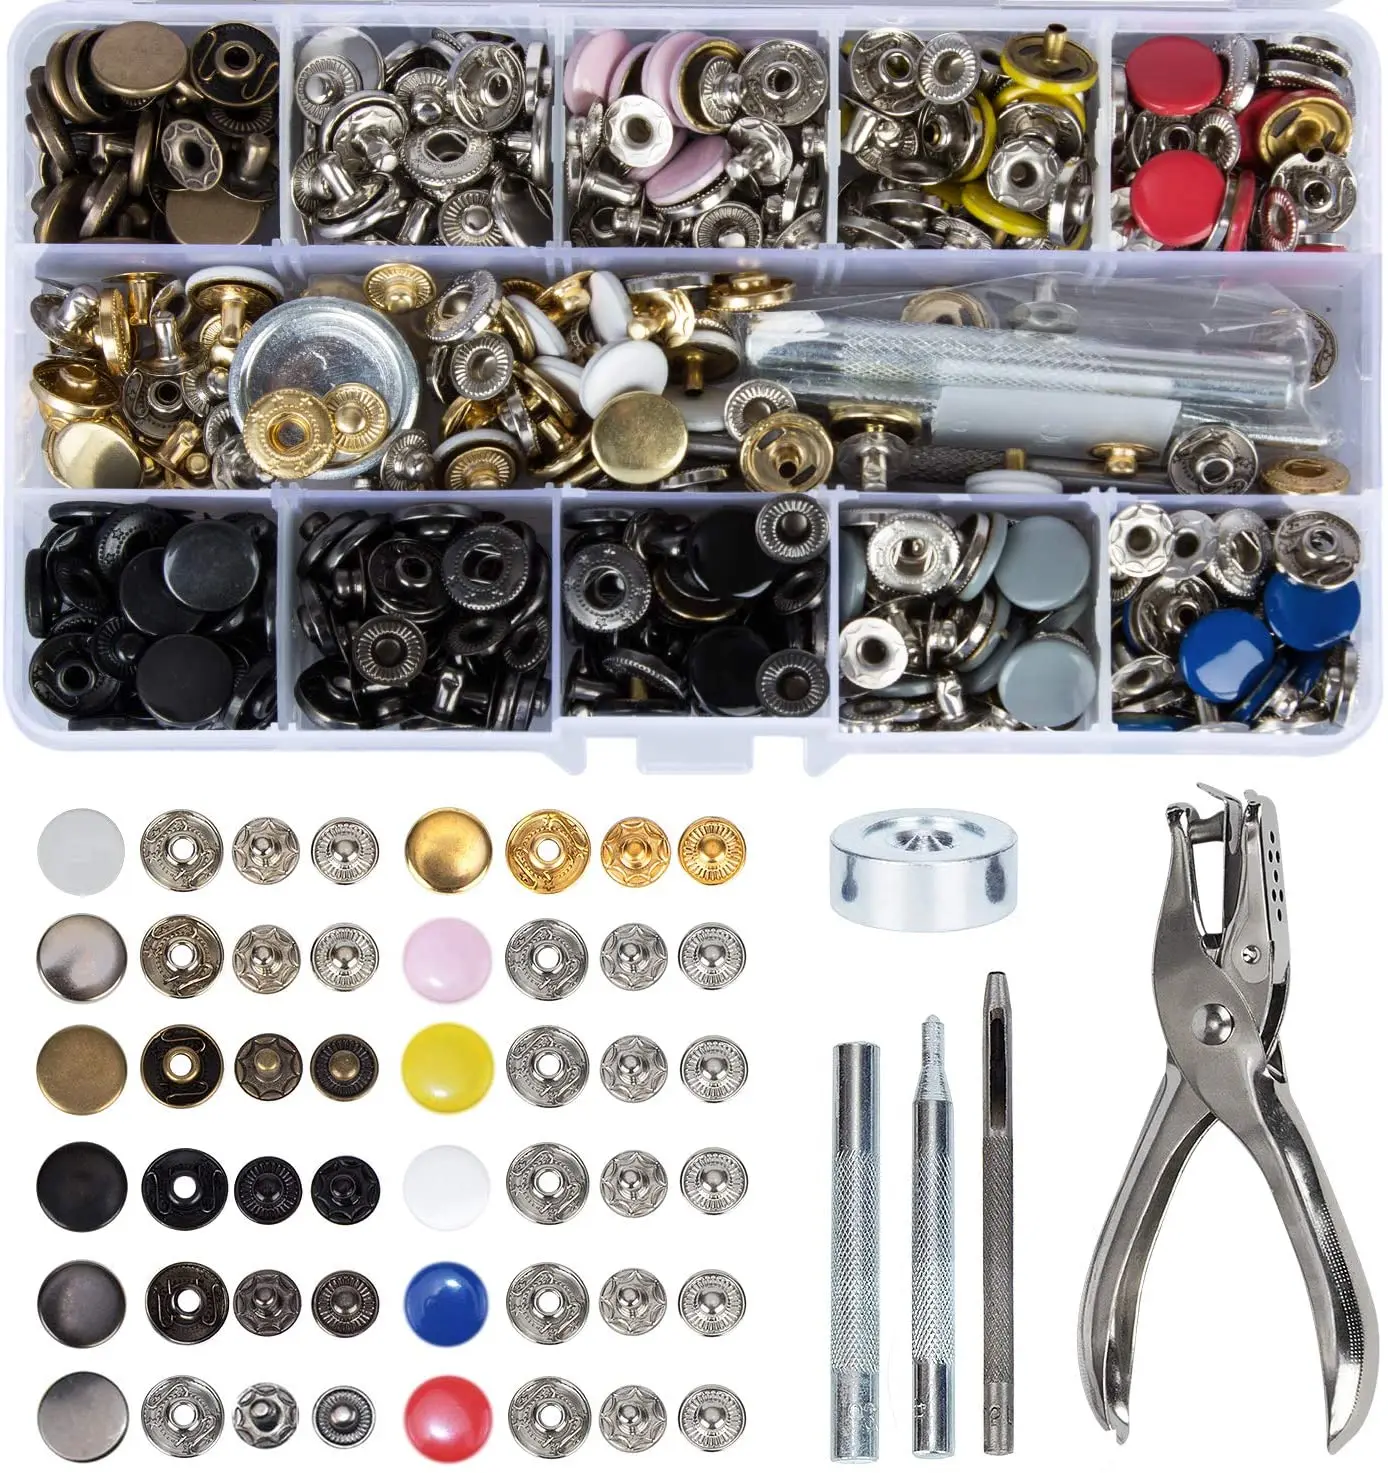 120sets Leather Snap Press Button Fasteners Kit 12.5mm Metal Heavy Duty  Snaps Black, Gold,Silver,Bronze With Install Tool - AliExpress